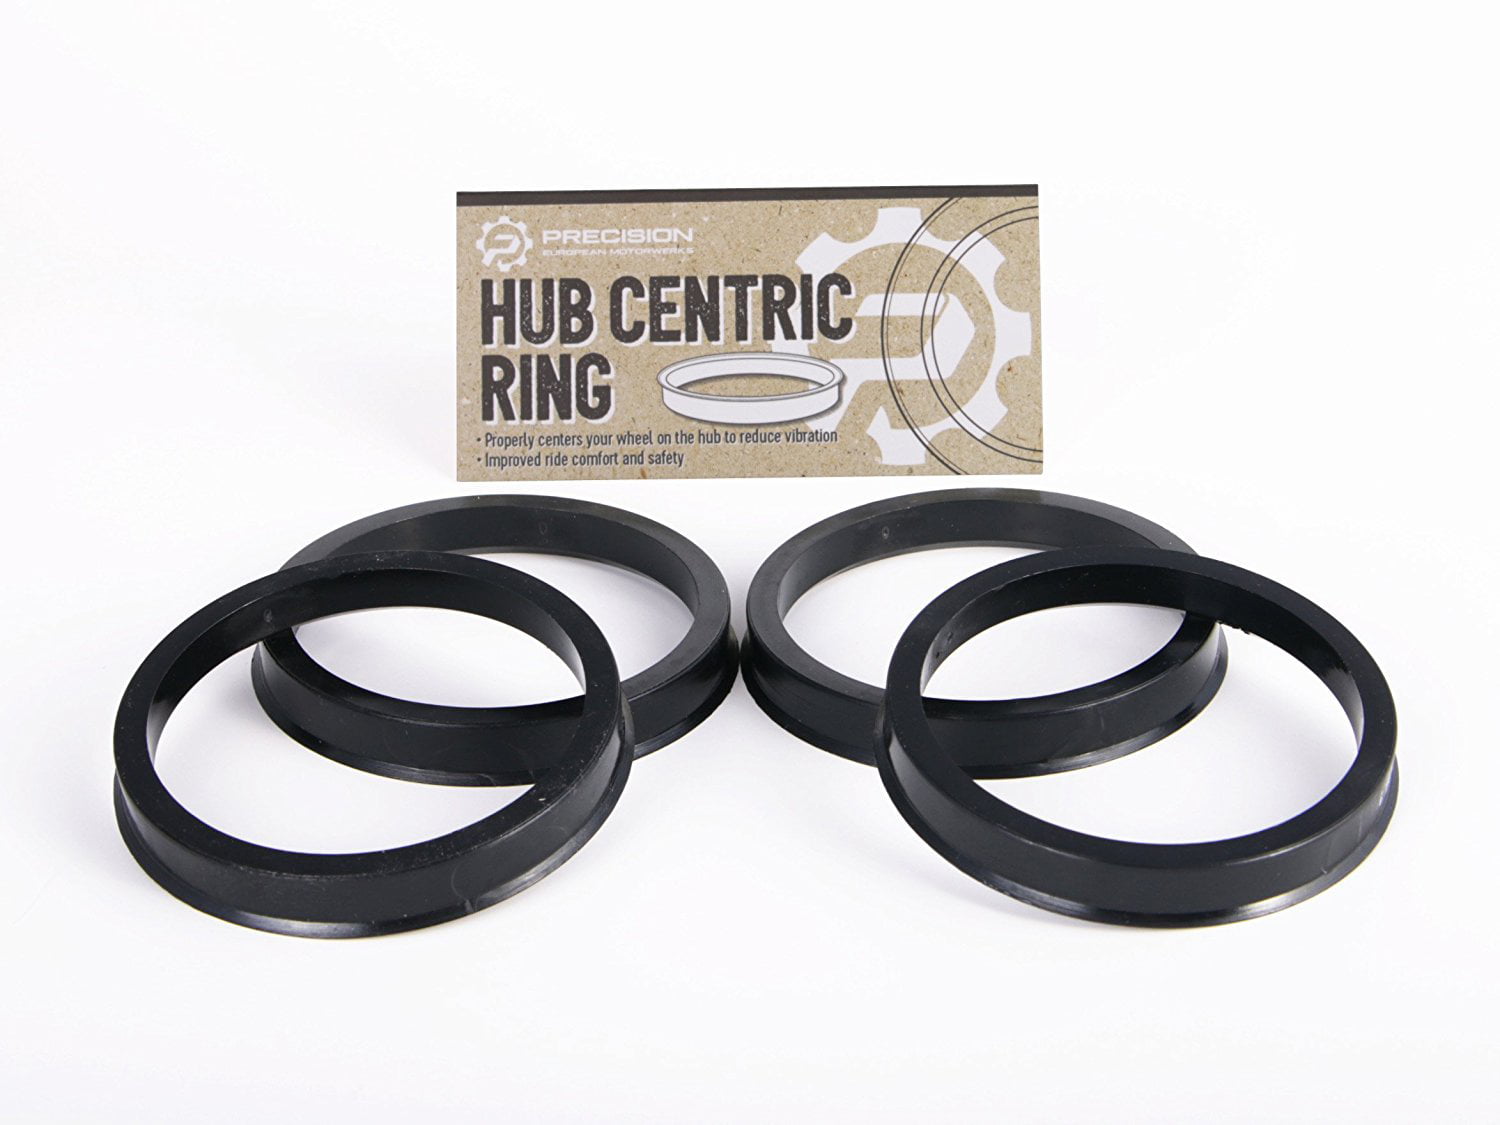 mm ABS Plastic Hubrings 64.1 P Set of 4 WHEEL CONNECT Hub Centric Rings O.D:73.1-I.D:64.15 